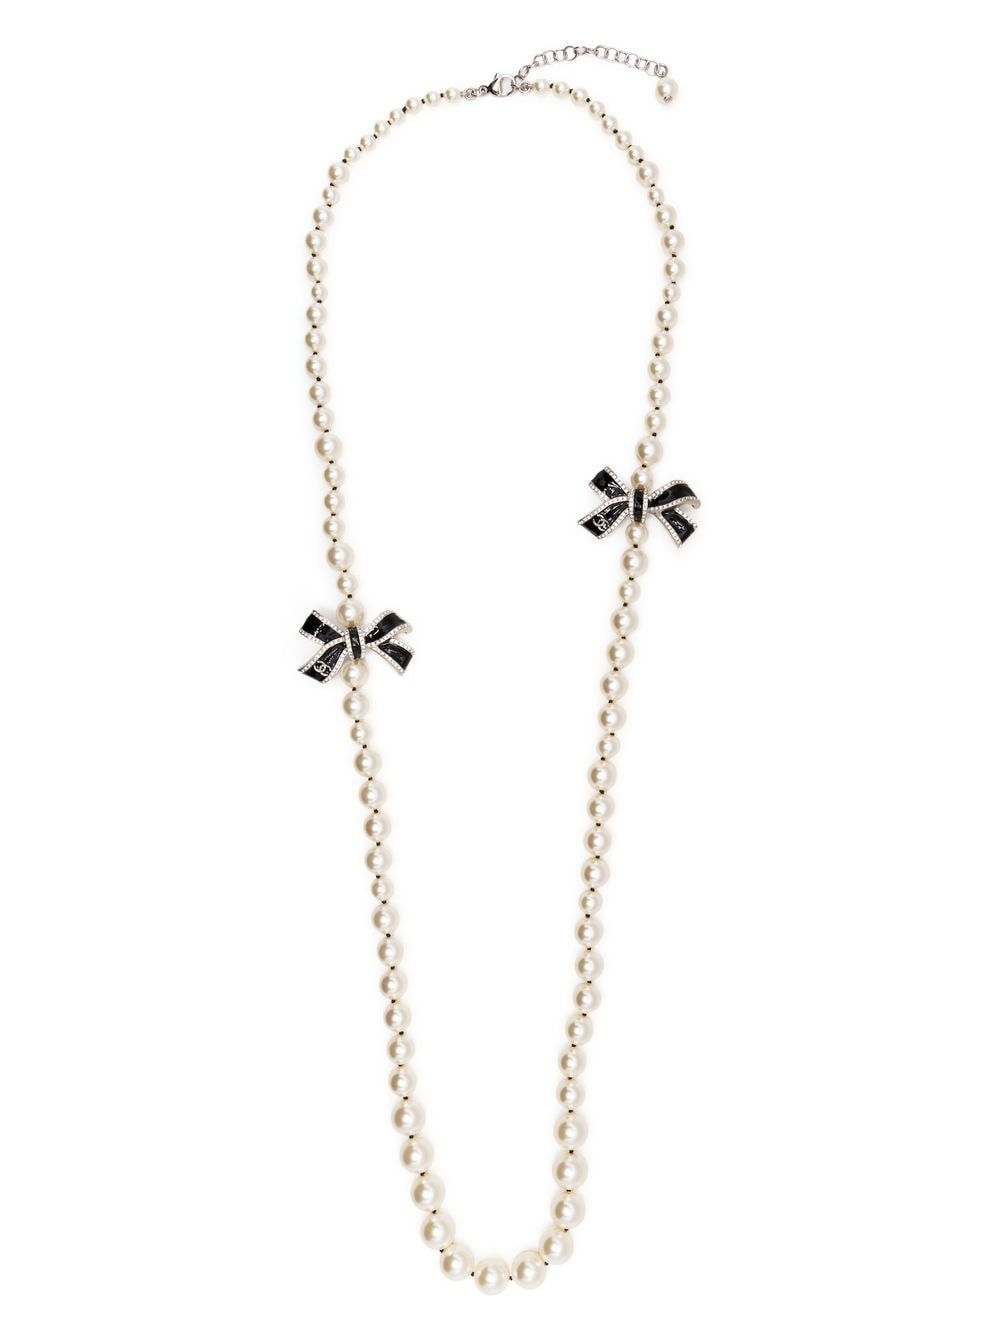 CHANEL Pre-Owned 1981-1985 Bow Charm Pearl Necklace - Farfetch